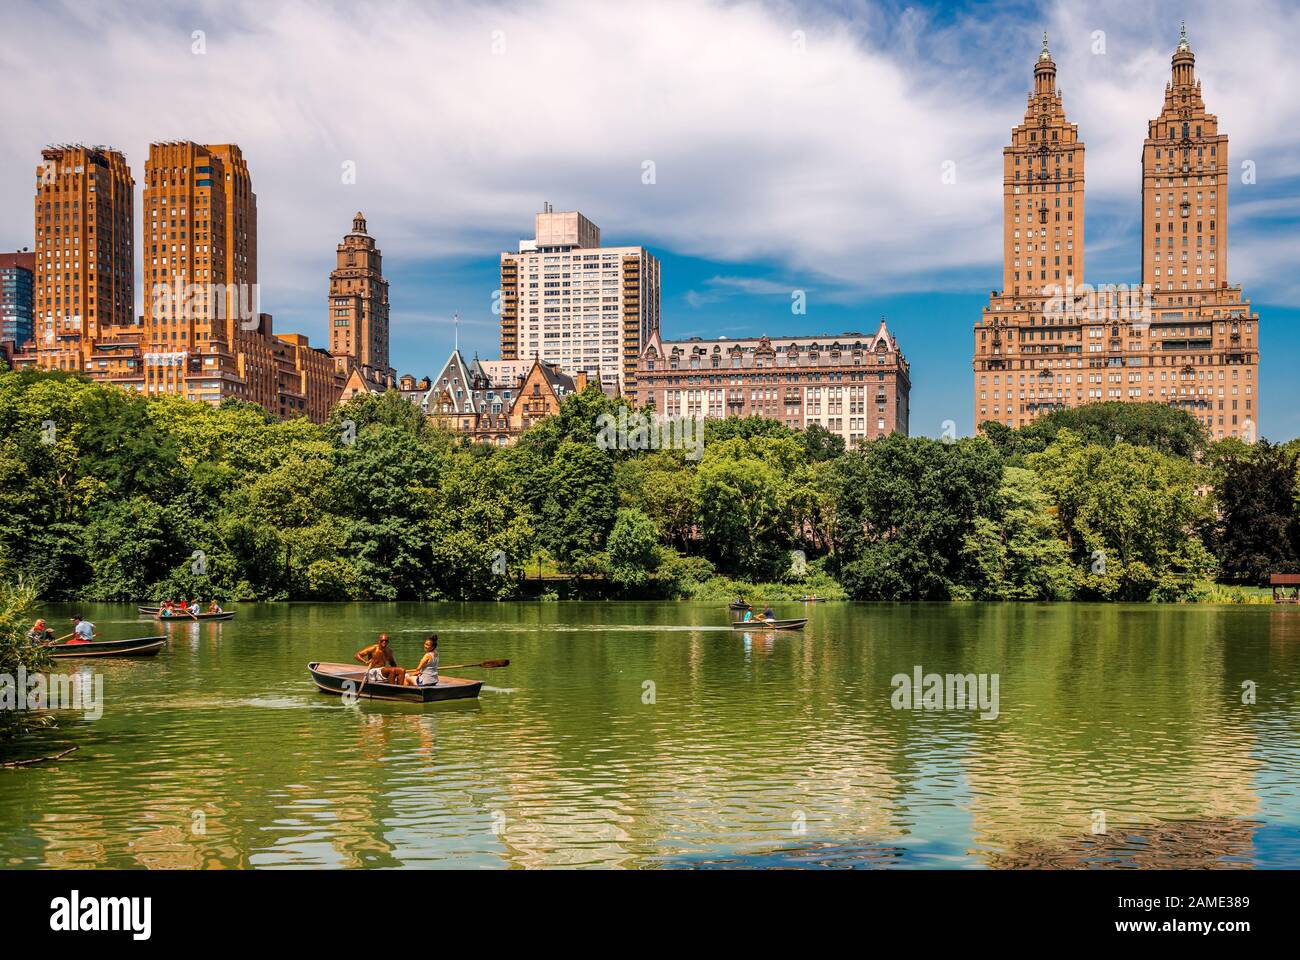 NYC, NY / USA - July 12 2014: People row in the Lake of the Central Park with the Upper West Side Manhattan skyline in the background. Stock Photo